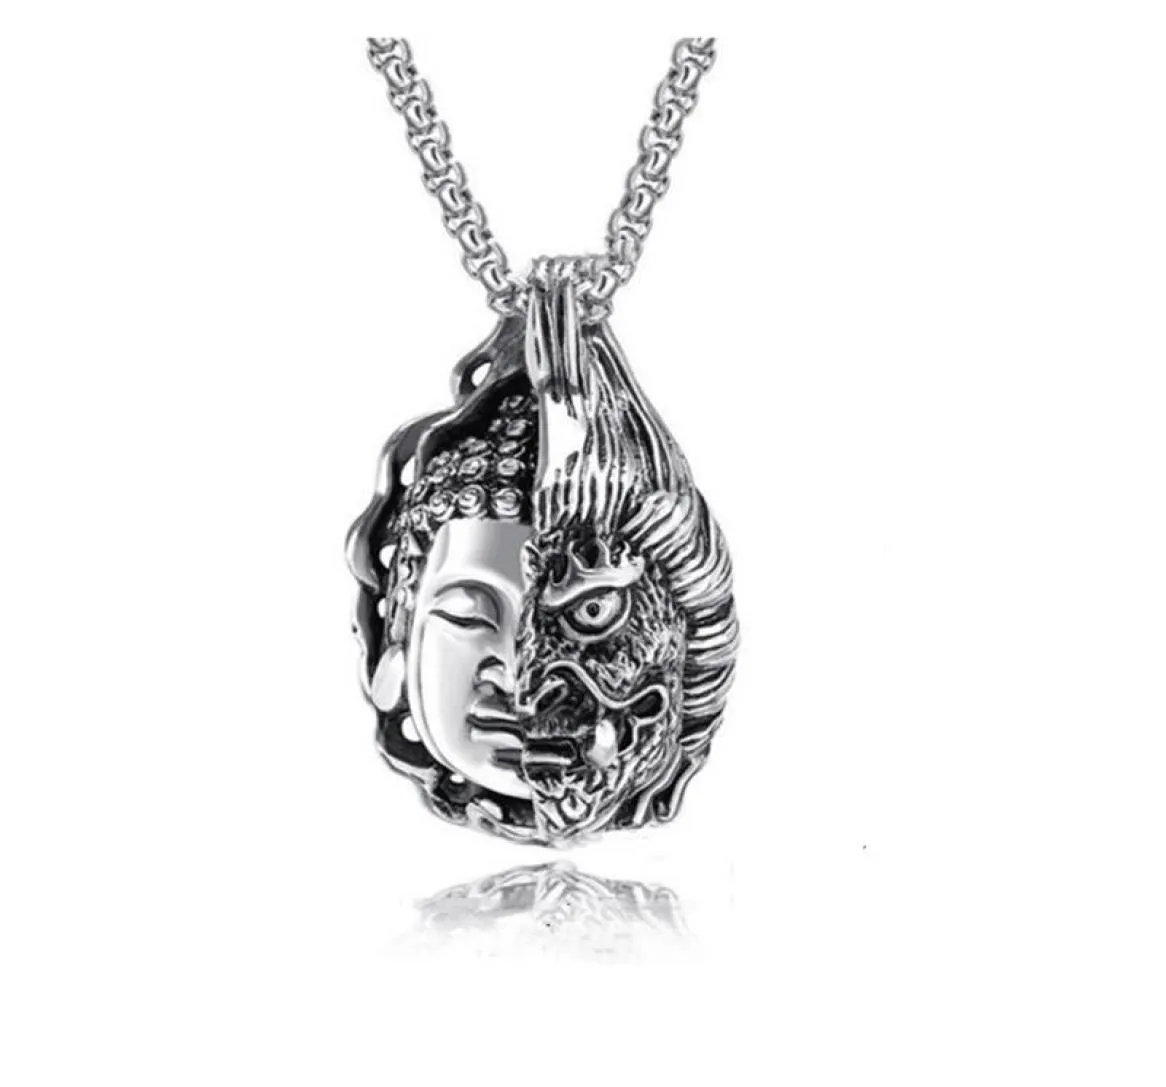 Pendant Necklaces Stainless Steel Chain Necklace Half Faced Buddha Face Devil Glamour Rock Hip Hop Men And Women Jewelry9875776